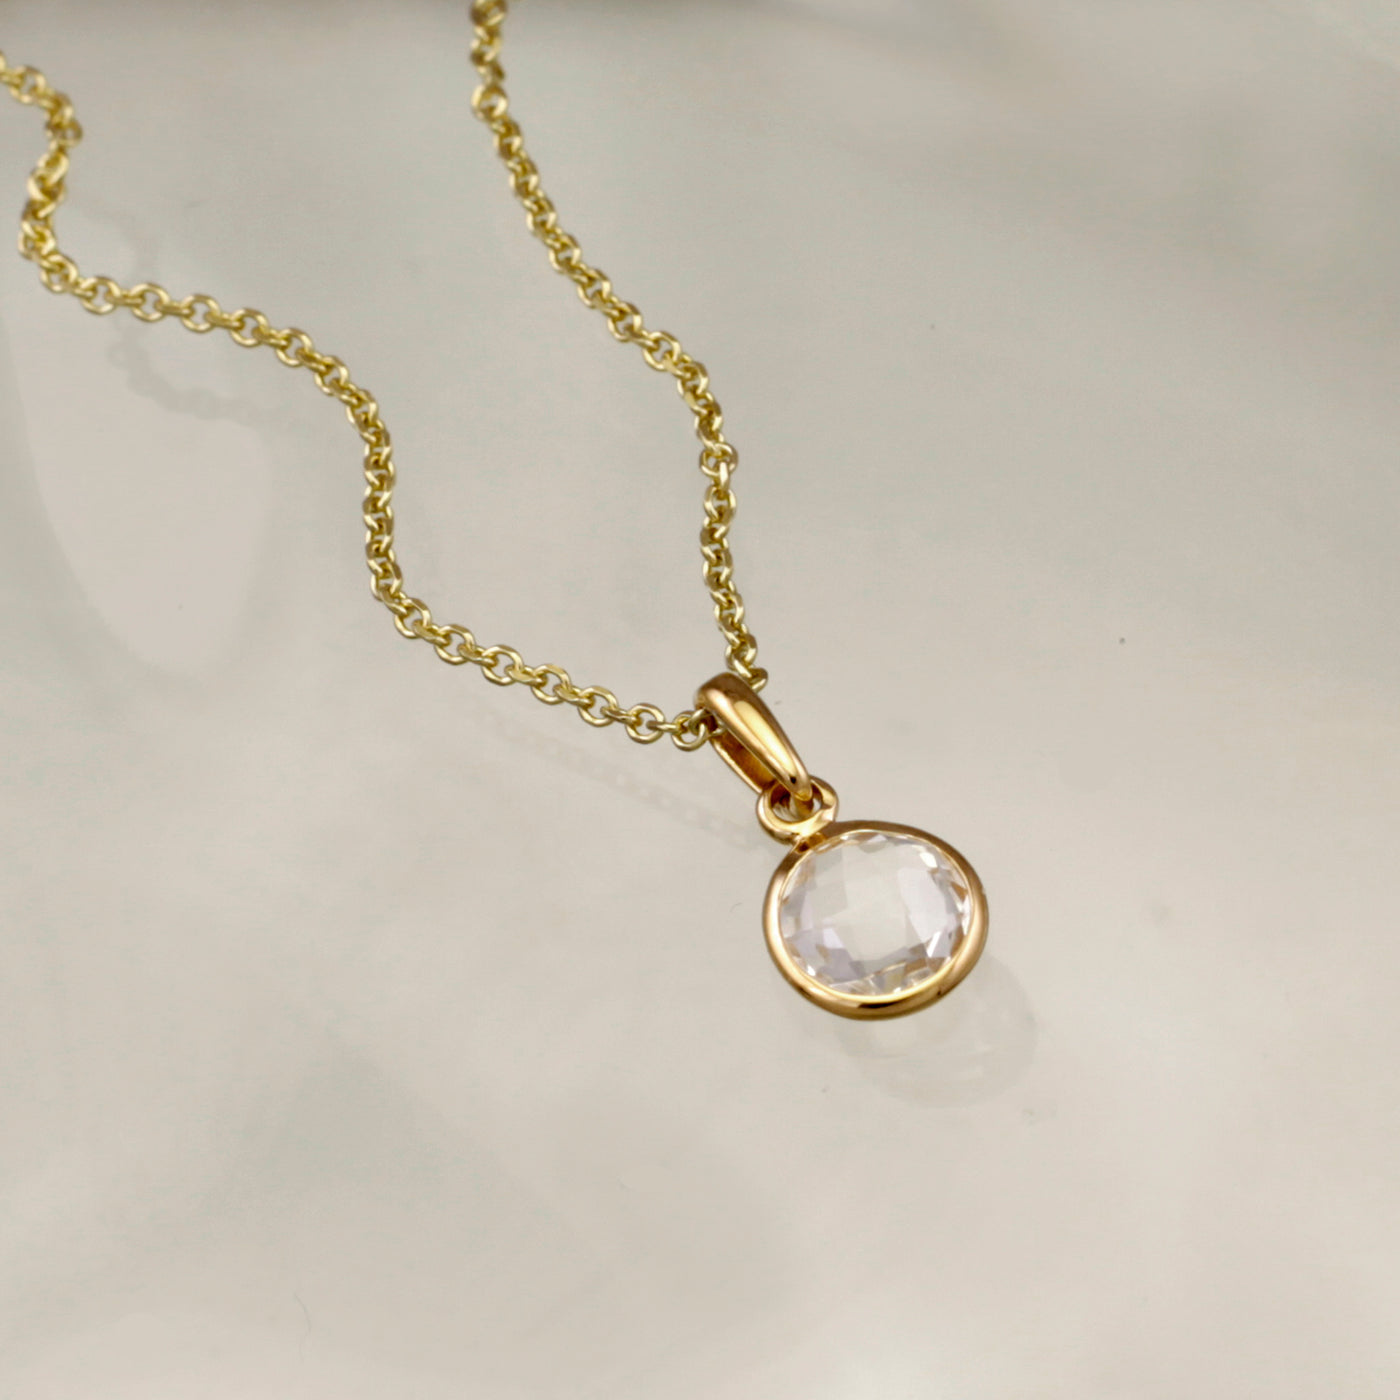 Image of Gold and White Topaz Pendant Necklace